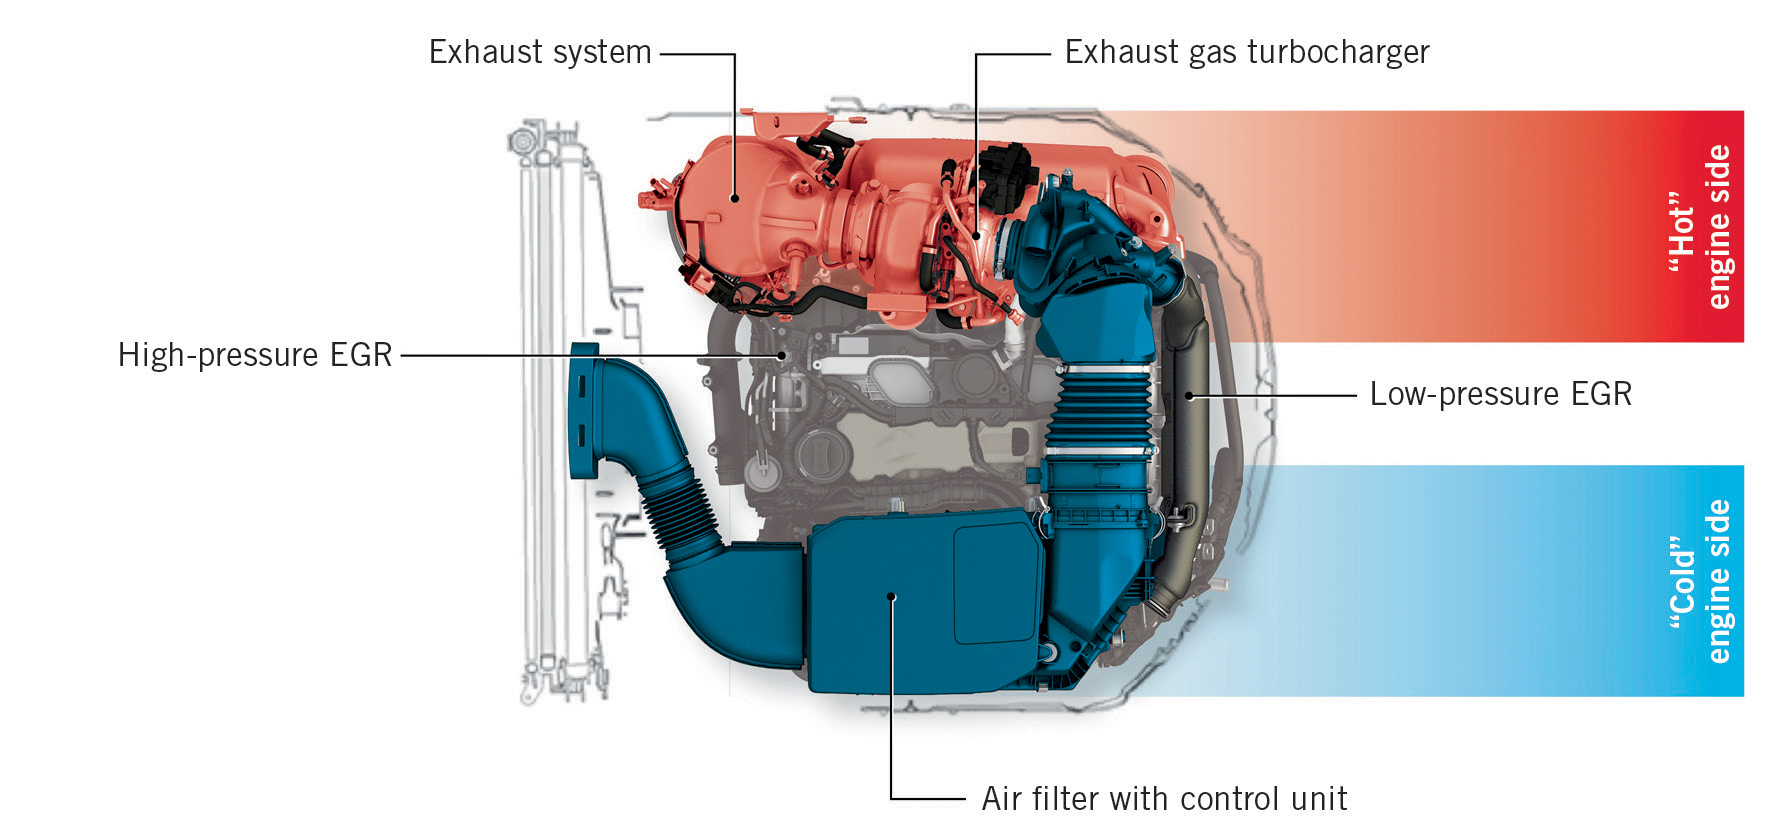 OM 654 — Launch of a New Engine Family by Mercedes-Benz | SpringerLink